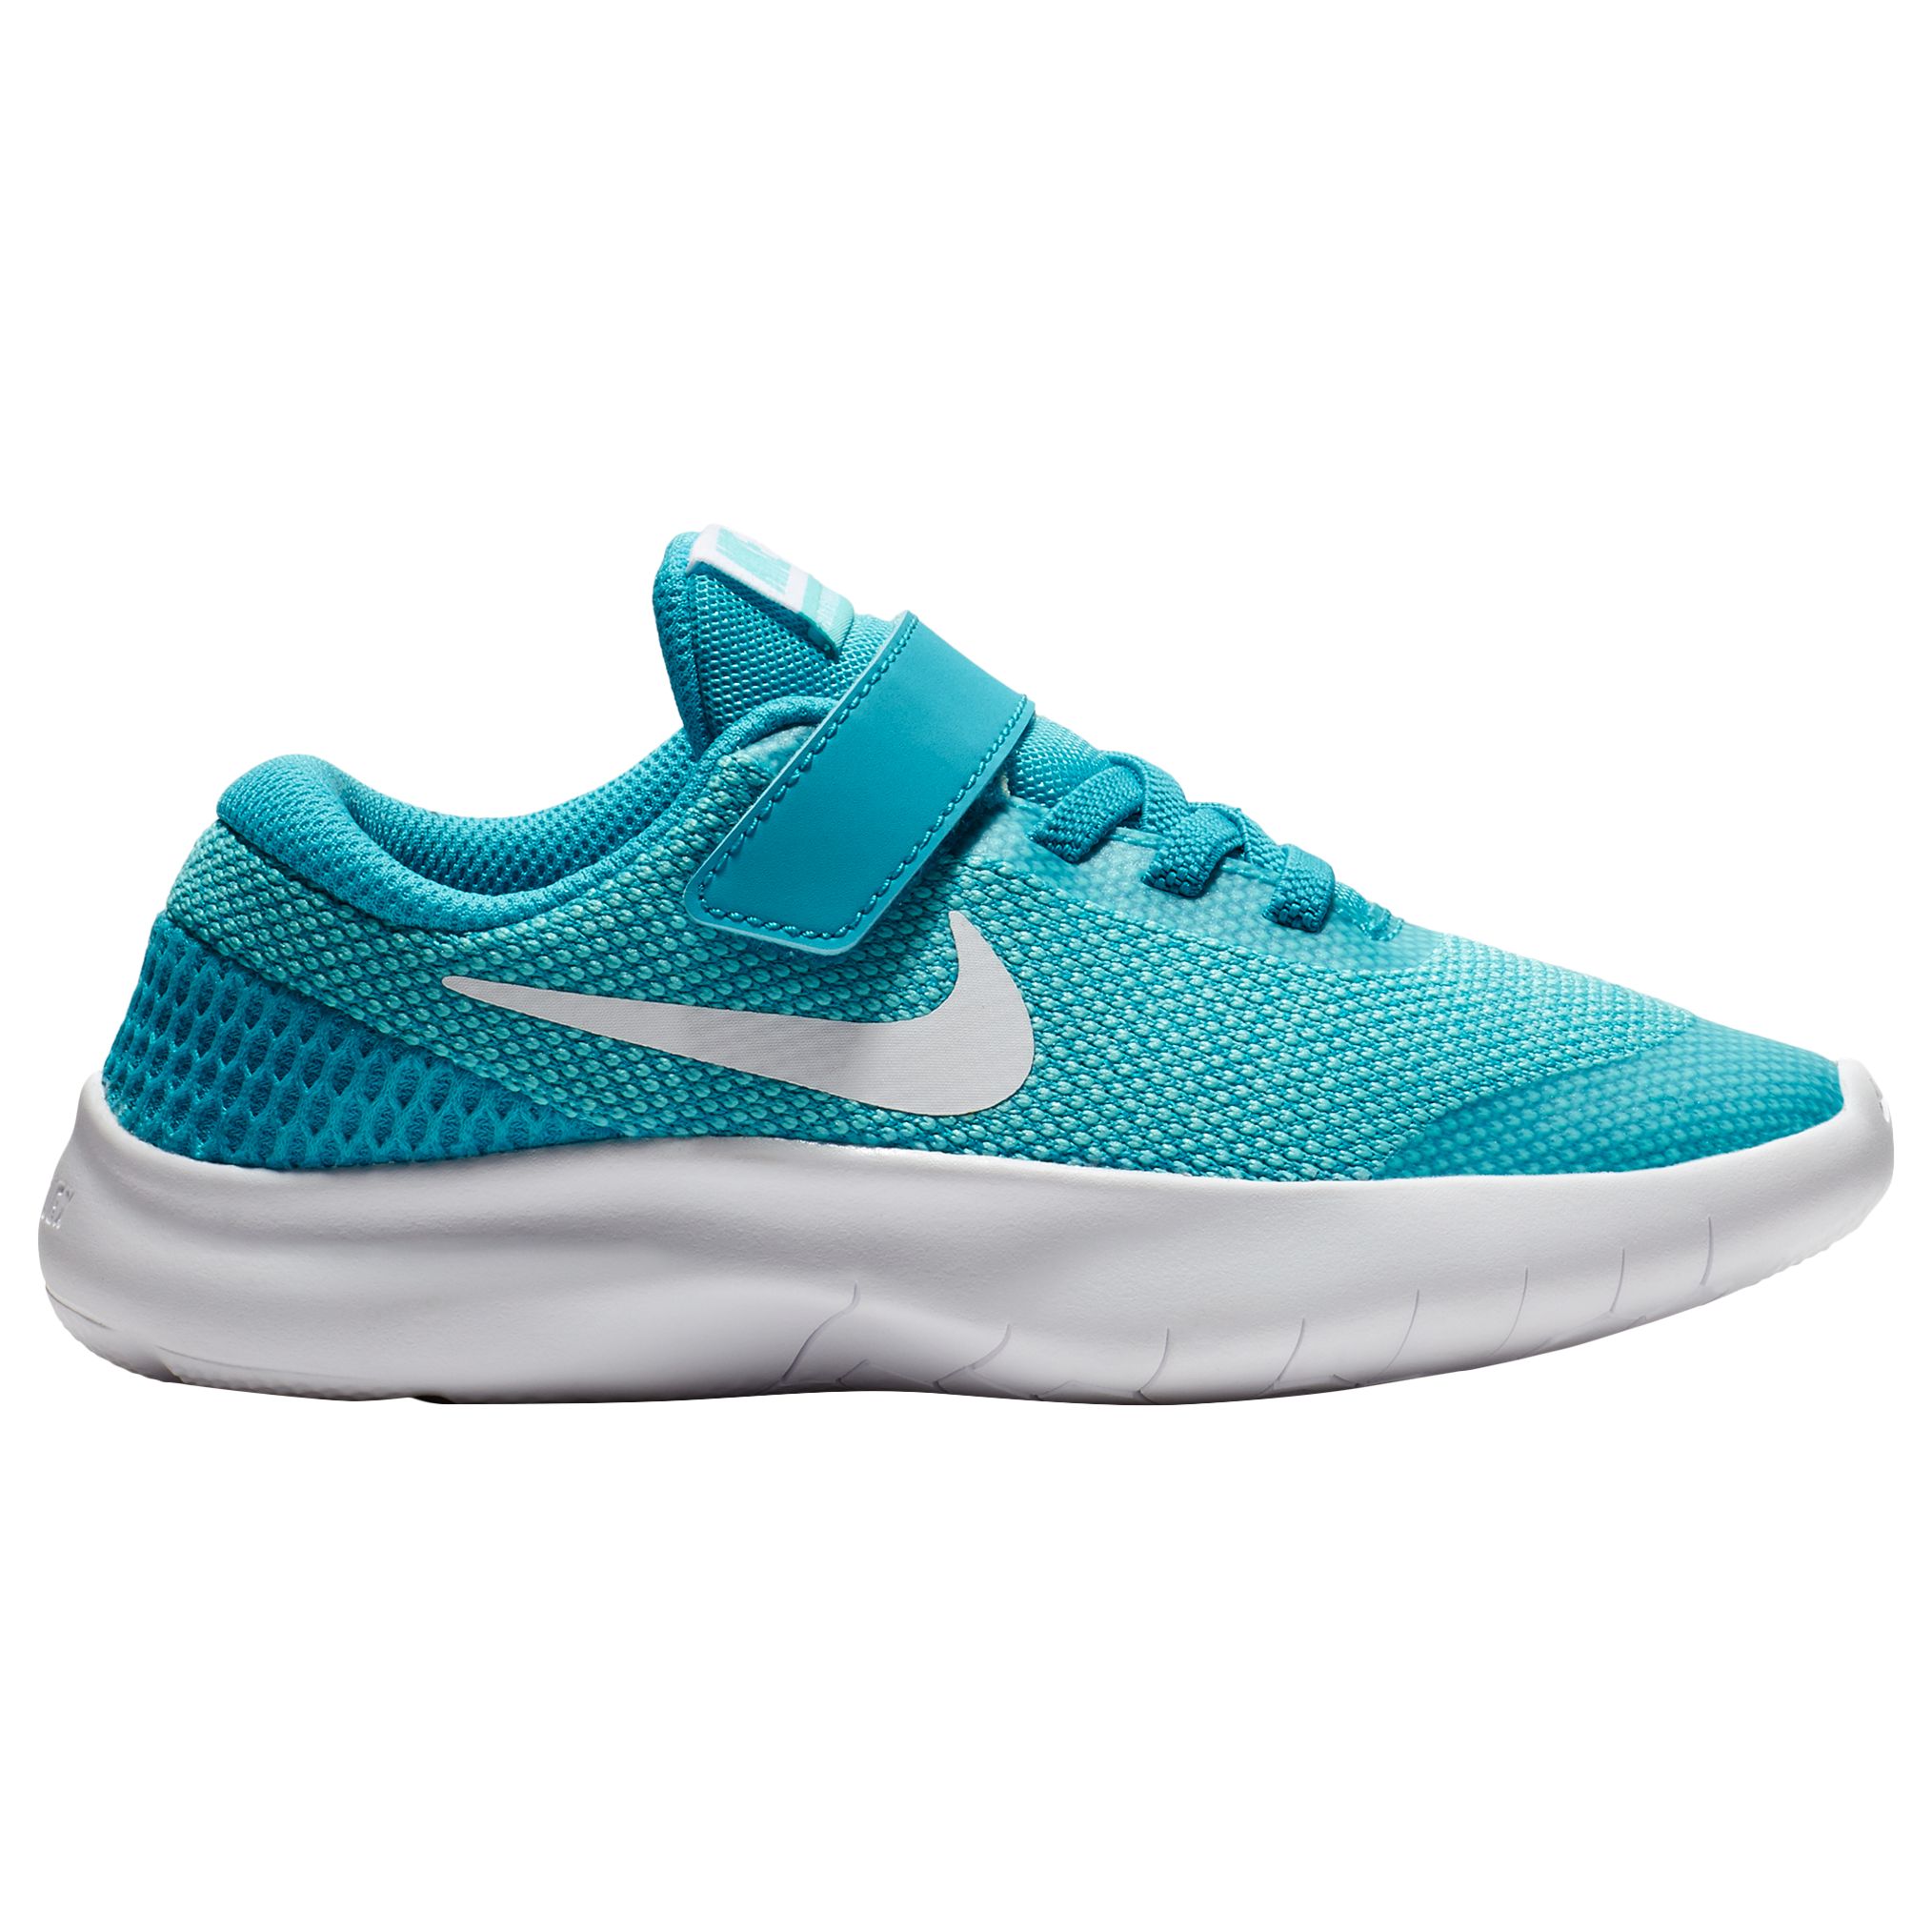 Nike Children's Flex Experience Run 7 PS Trainers, Turquoise, 13 Jnr